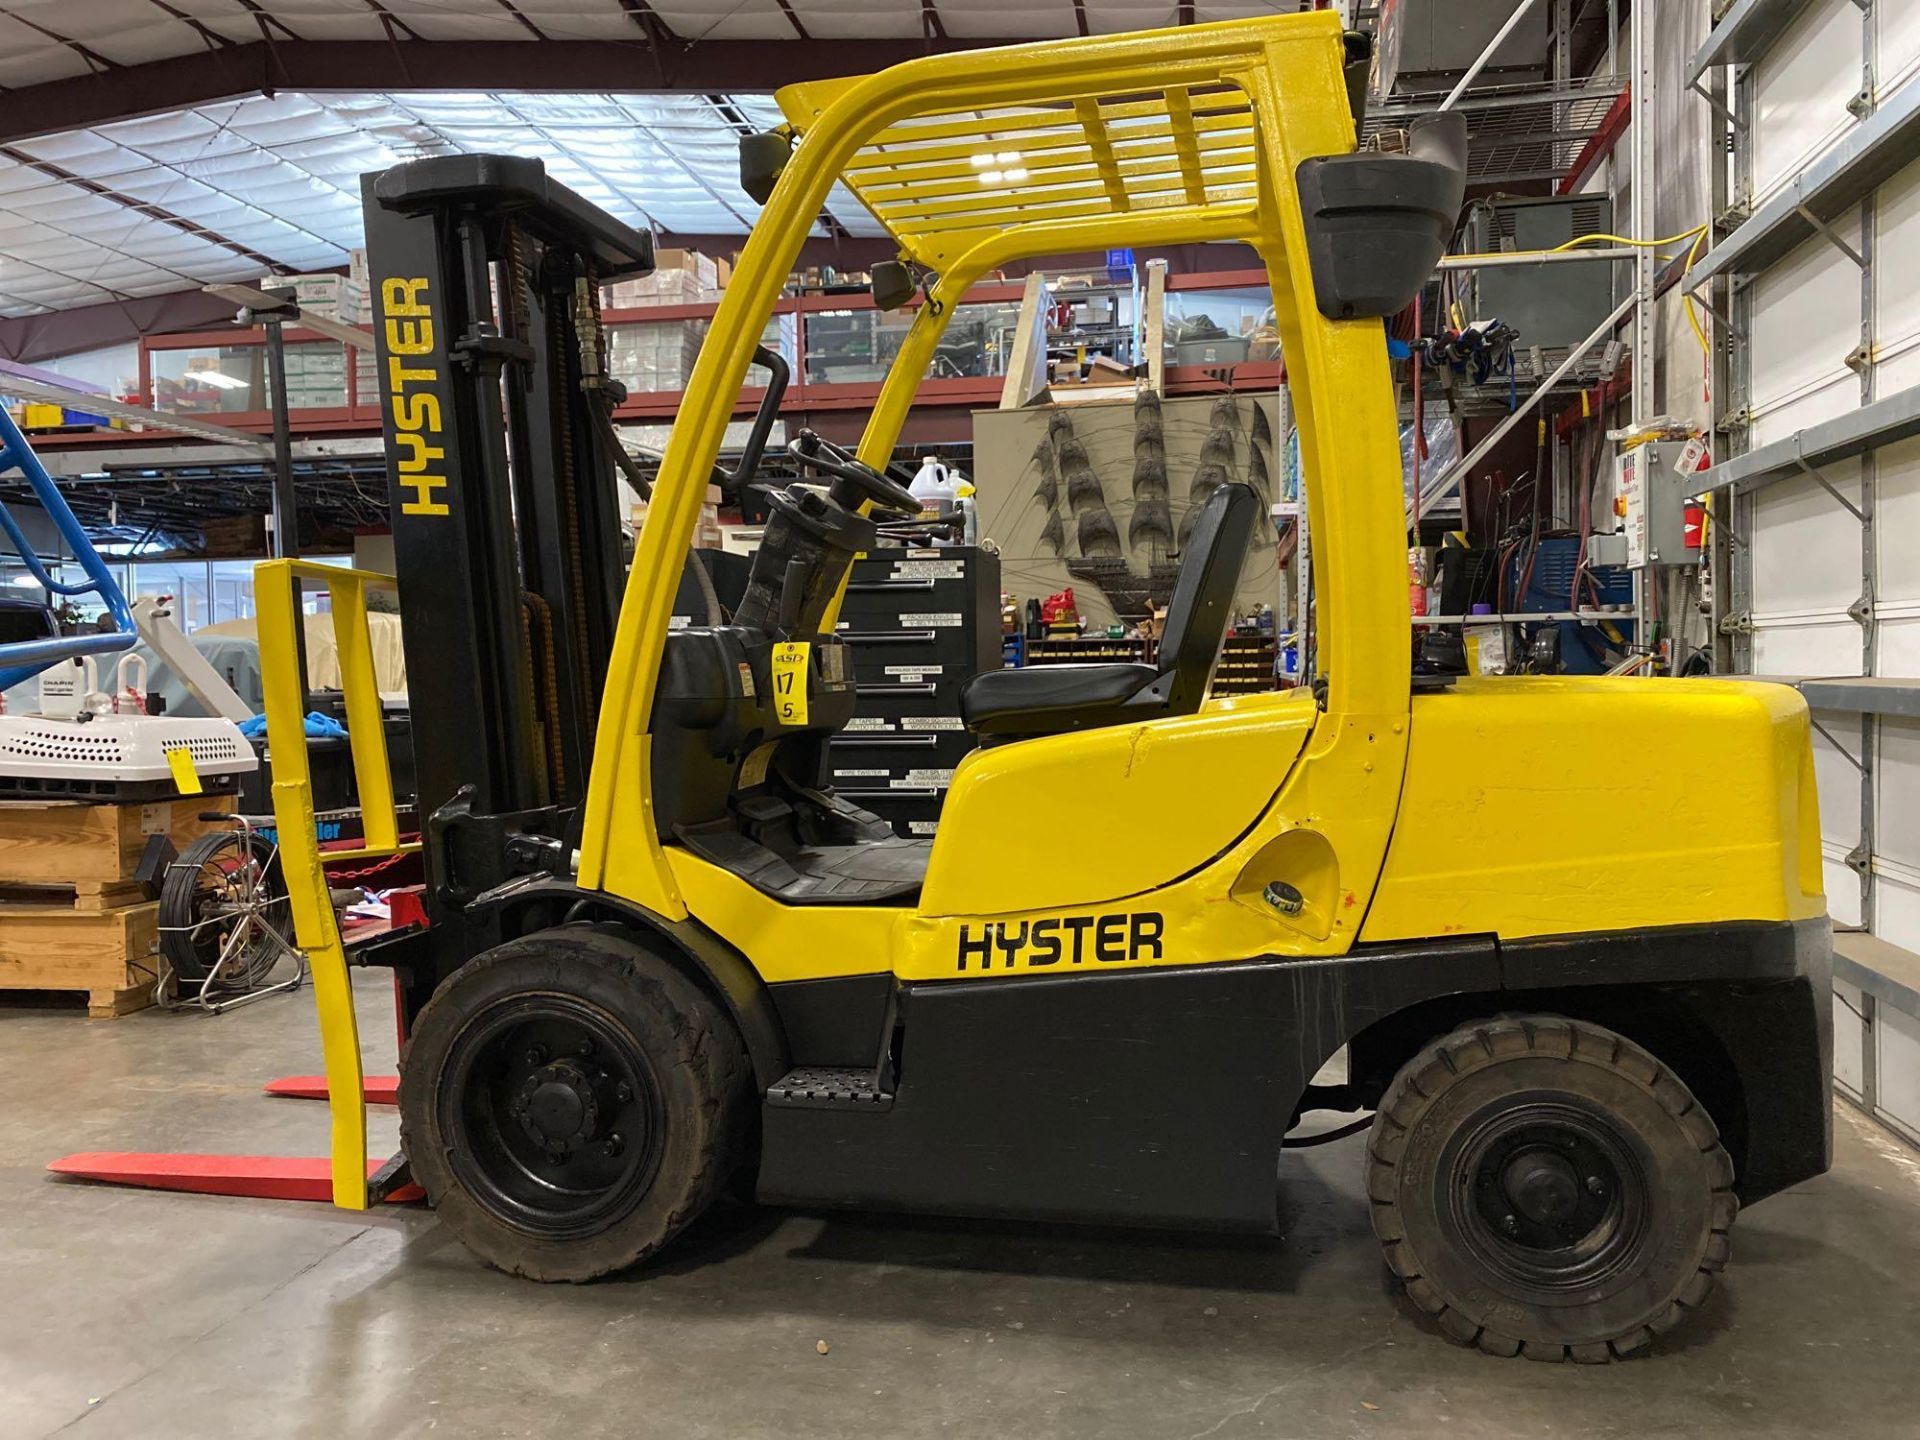 HYSTER H70FT FORKLIFT, APPROX. 7,000 LB CAPACITY, 181.9" HEIGHT CAP, TILT, RUNS AND OPERATES